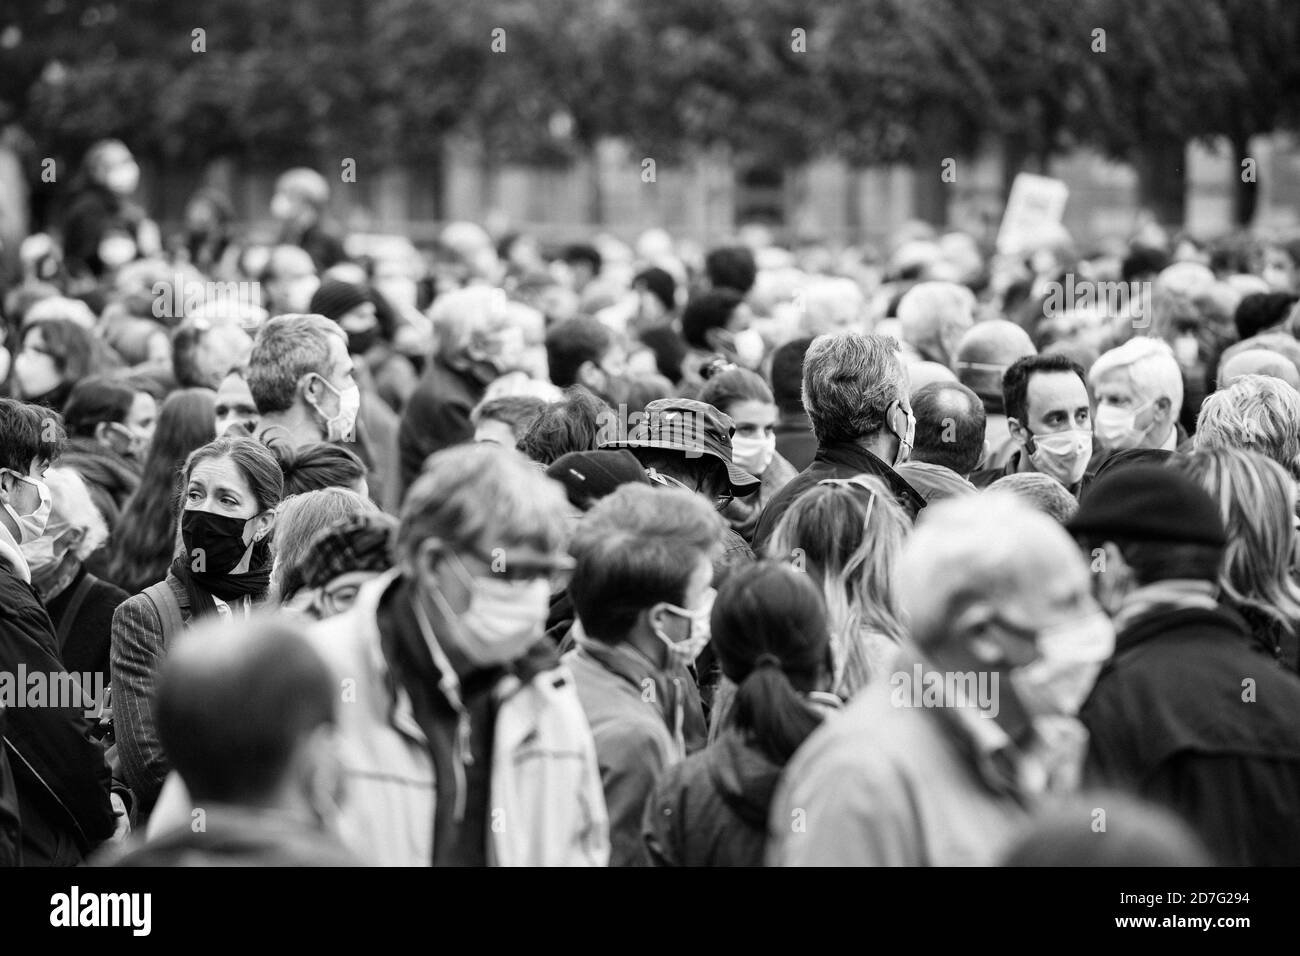 Strasbourg, France - Oct 19, 2020: Black and white image of people pay tribute to history teacher Samuel Paty, beheaded on Oct 16th after showing caricatures of Prophet Muhammad in class Stock Photo